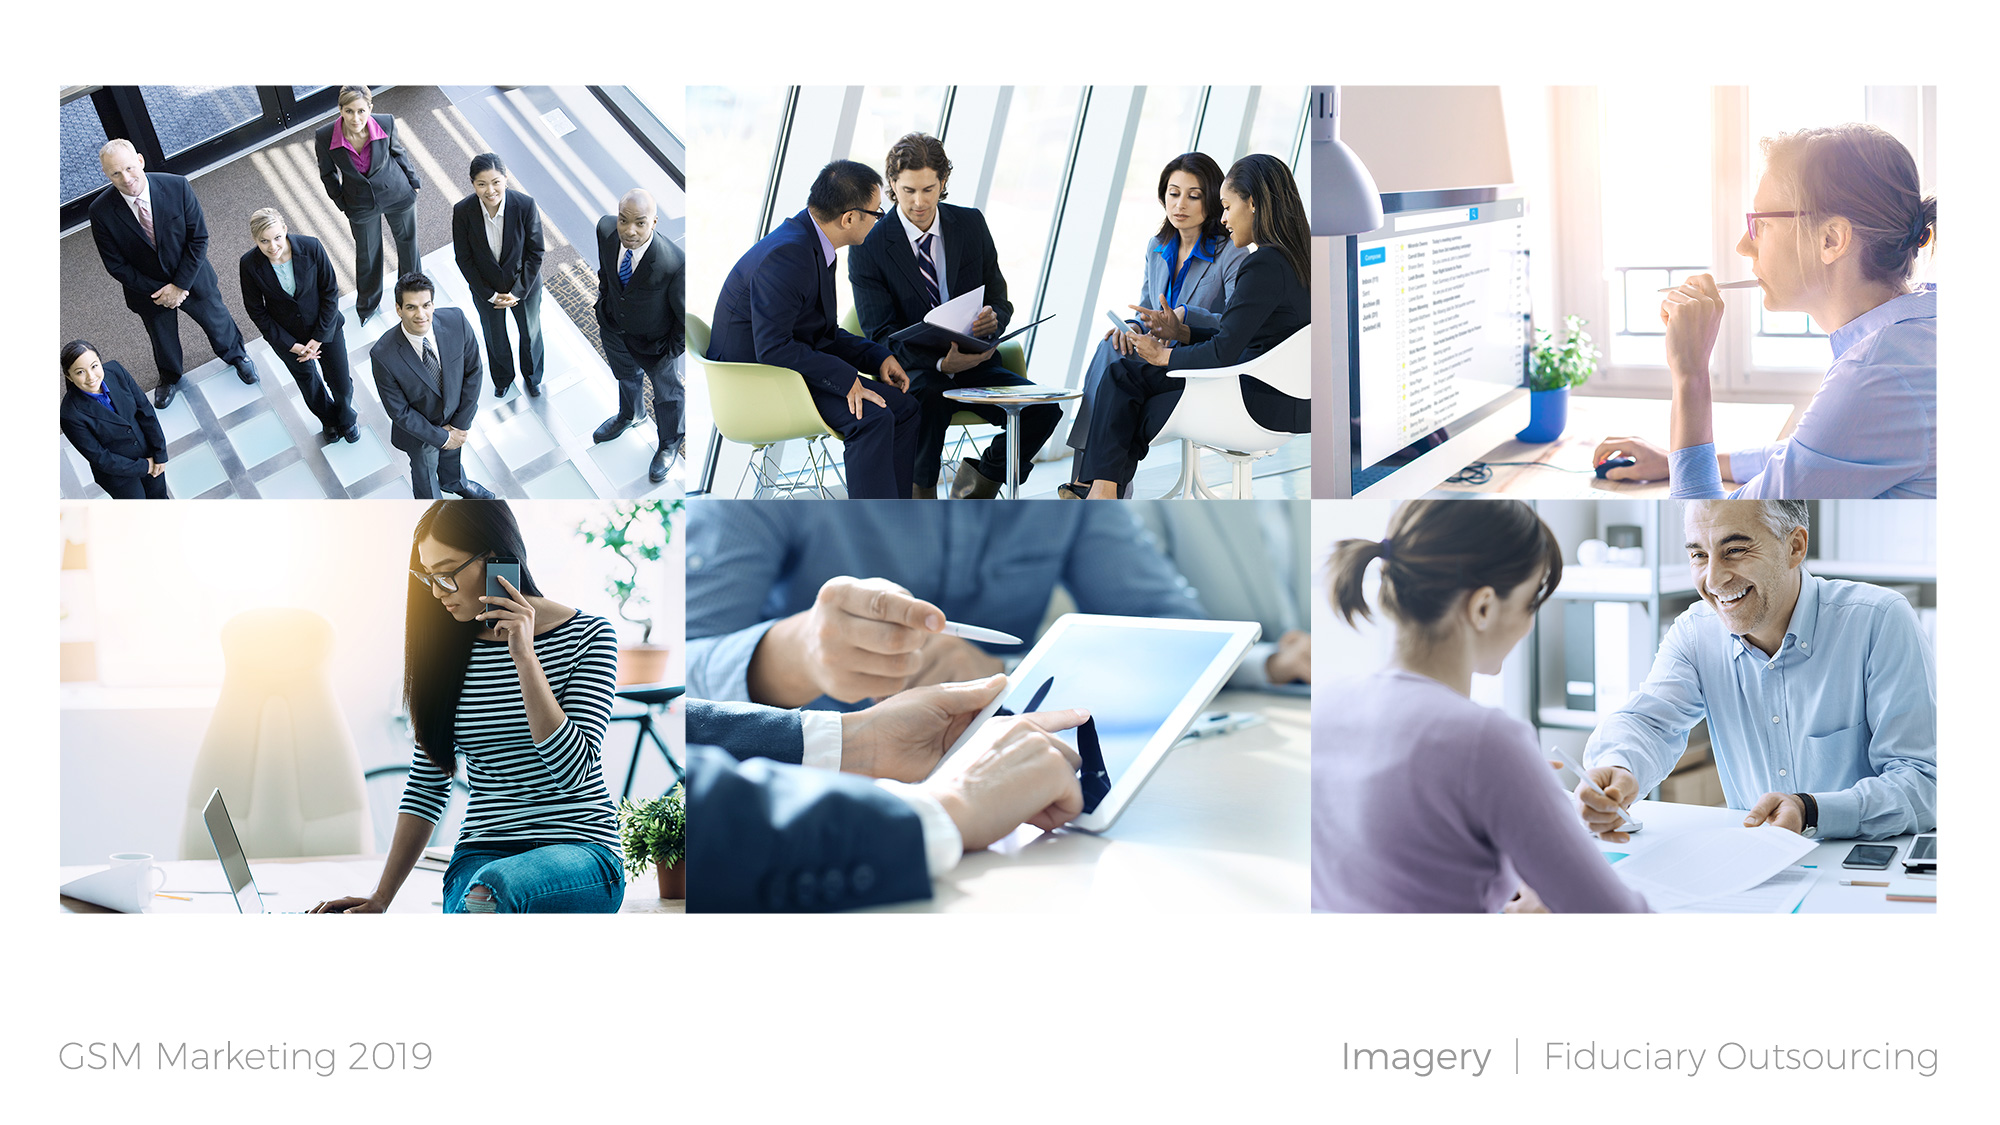 Fiduciary Outsourcing brand imagery plan